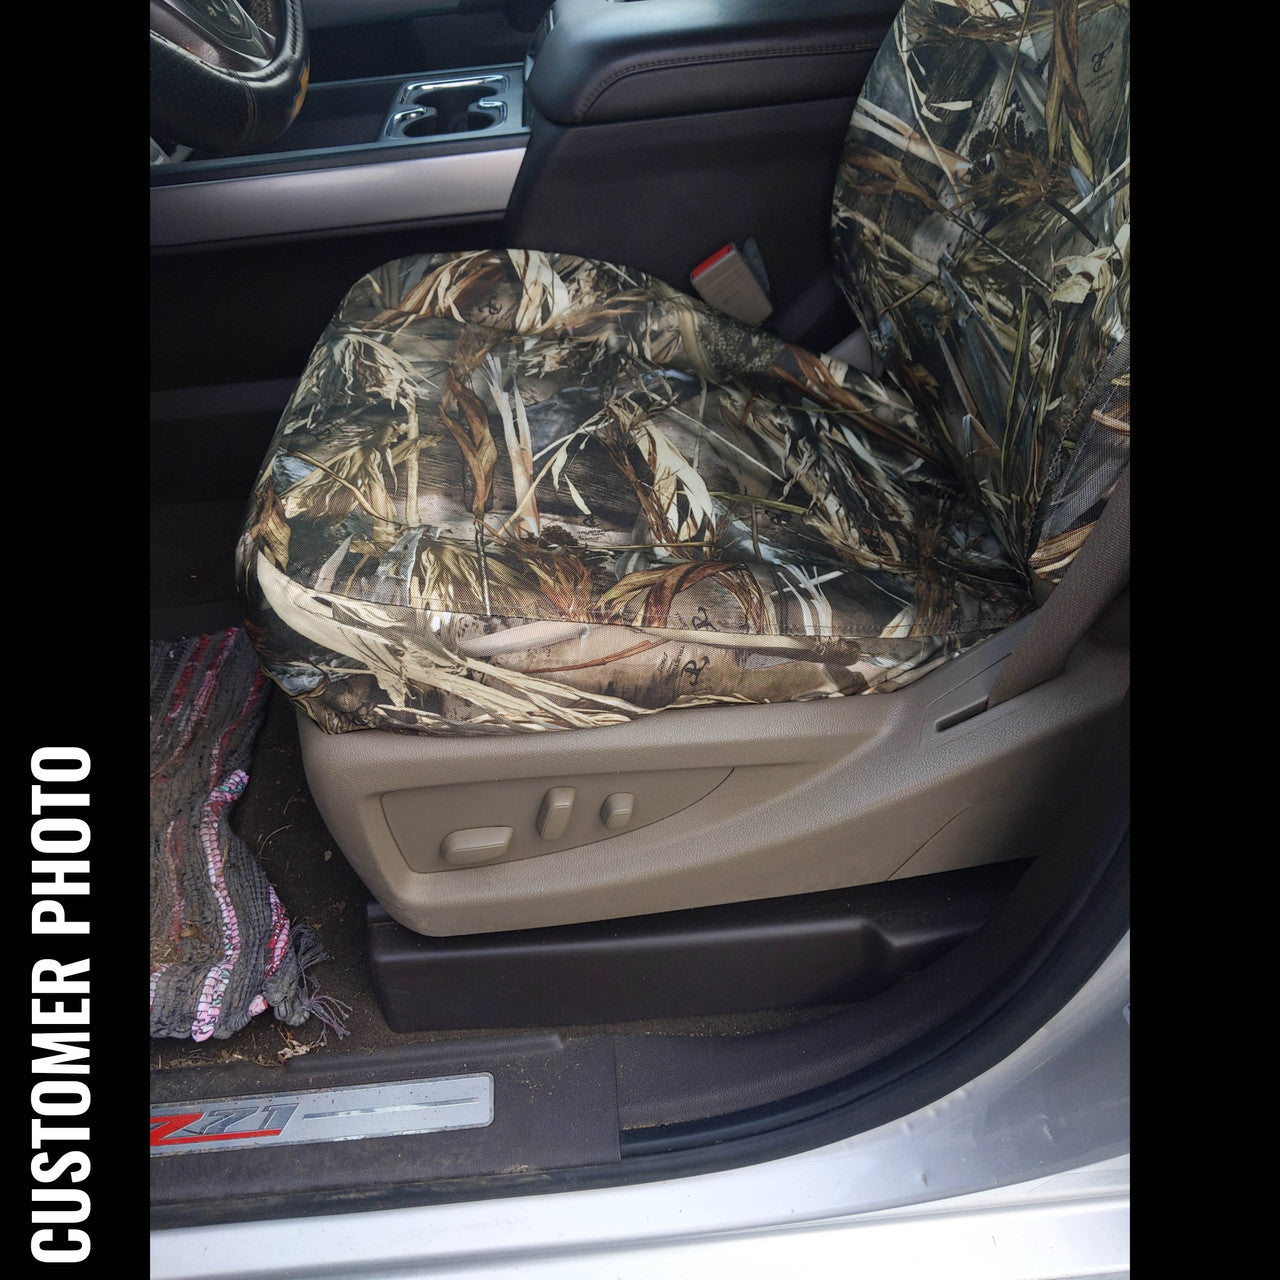 Chevy truck with Kanati TigerTough Sportweave seat covers.